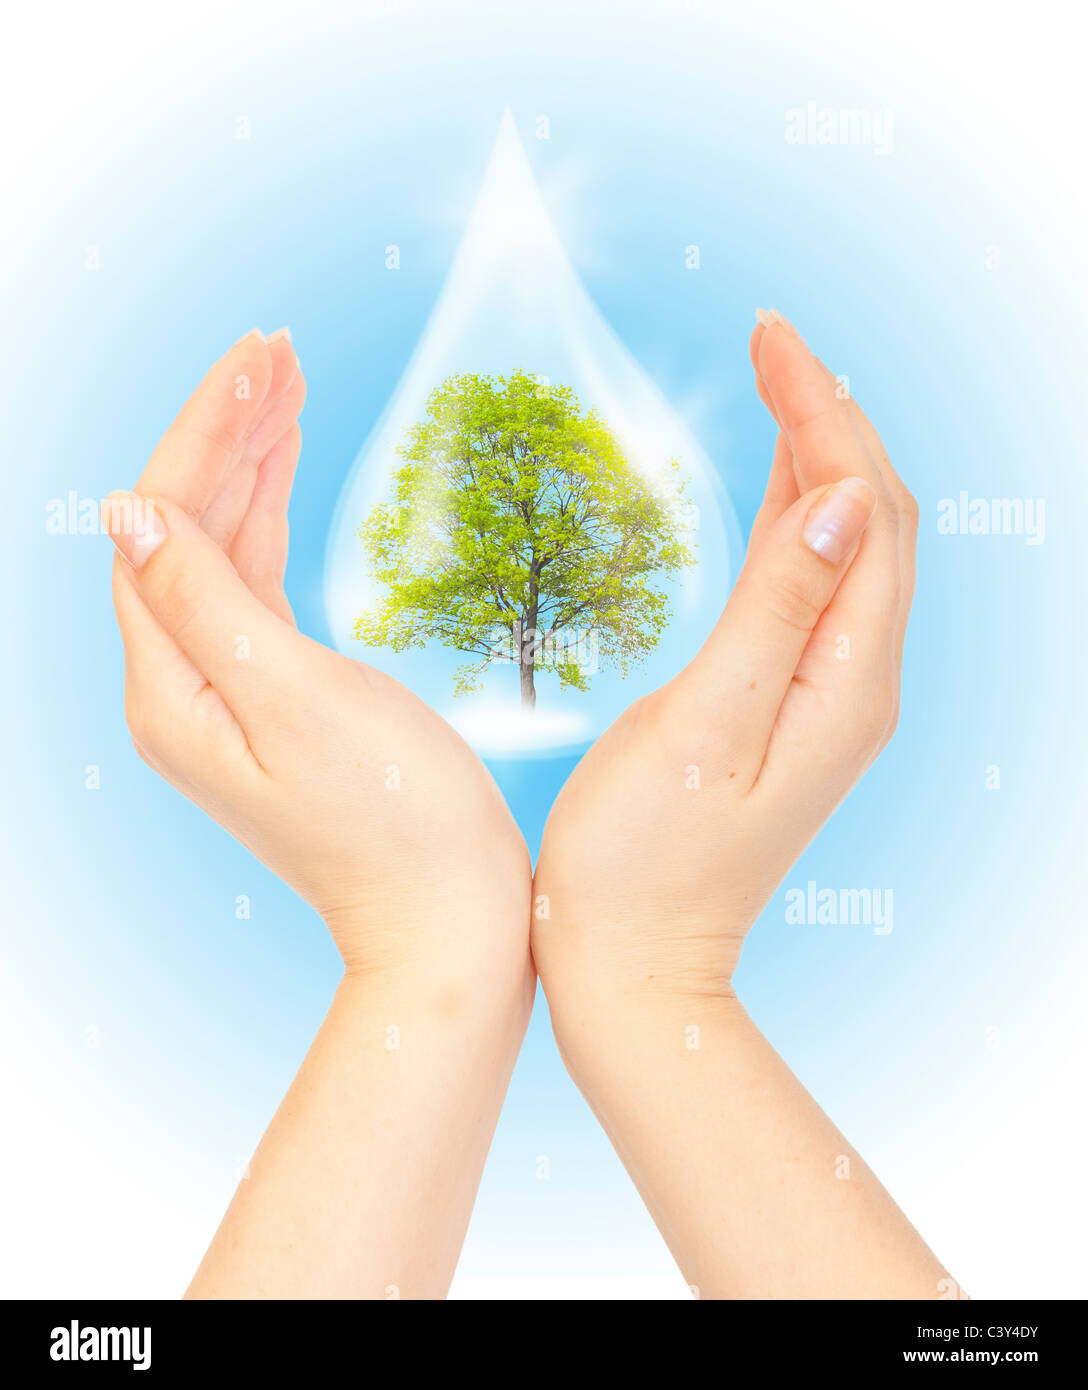 Drop of water with Tree inside and hands. The symbol of Save Green Planet. Stock Photo